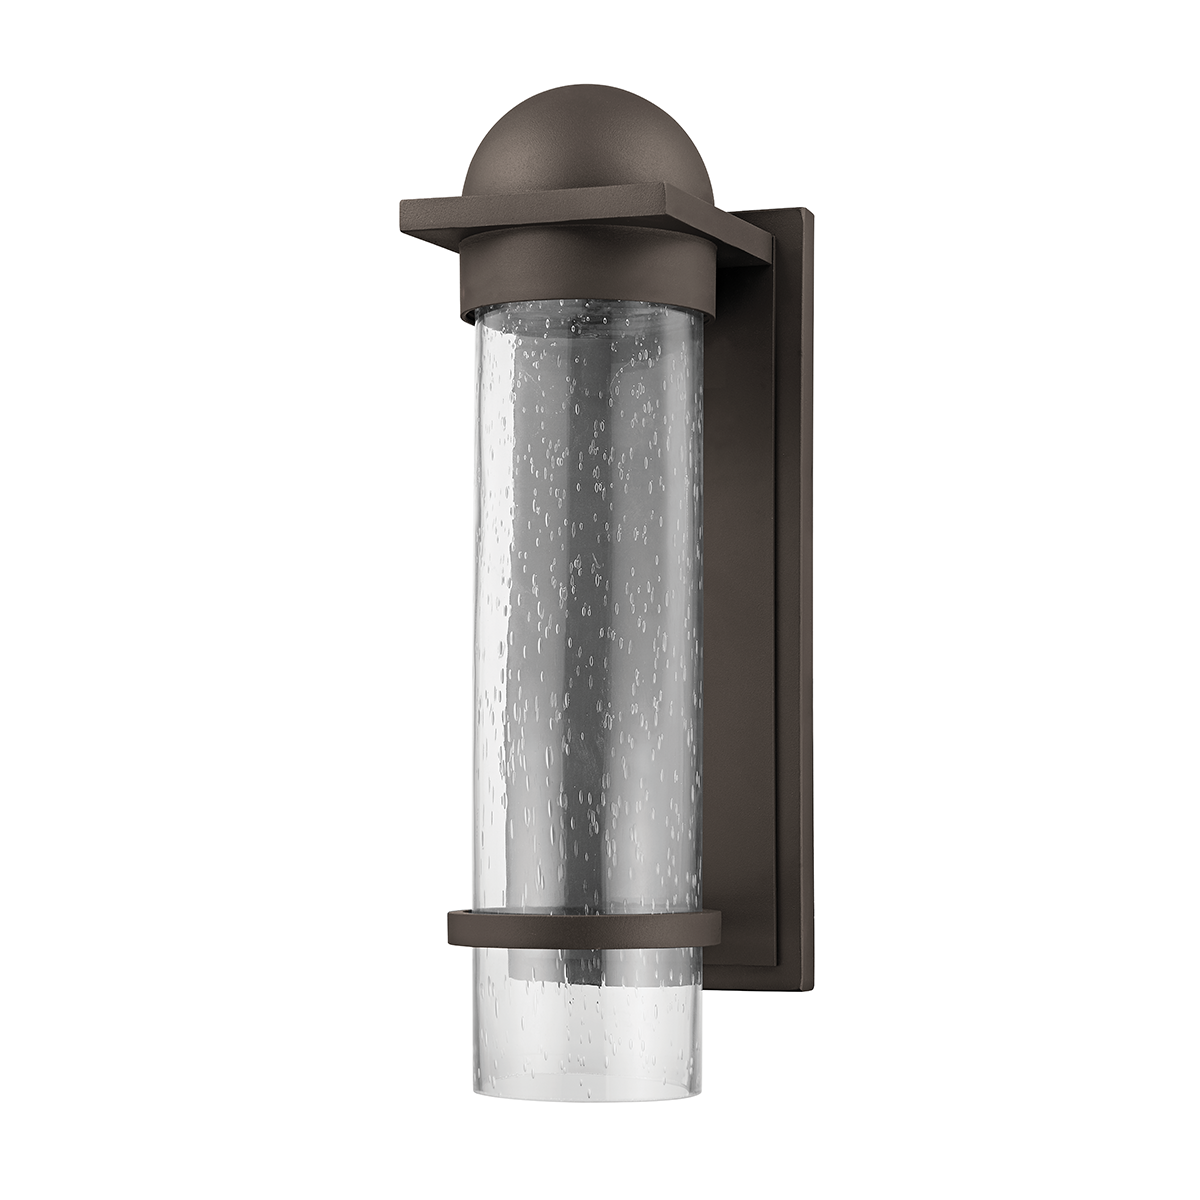 Troy Lighting 1 LIGHT LARGE EXTERIOR WALL SCONCE B7116